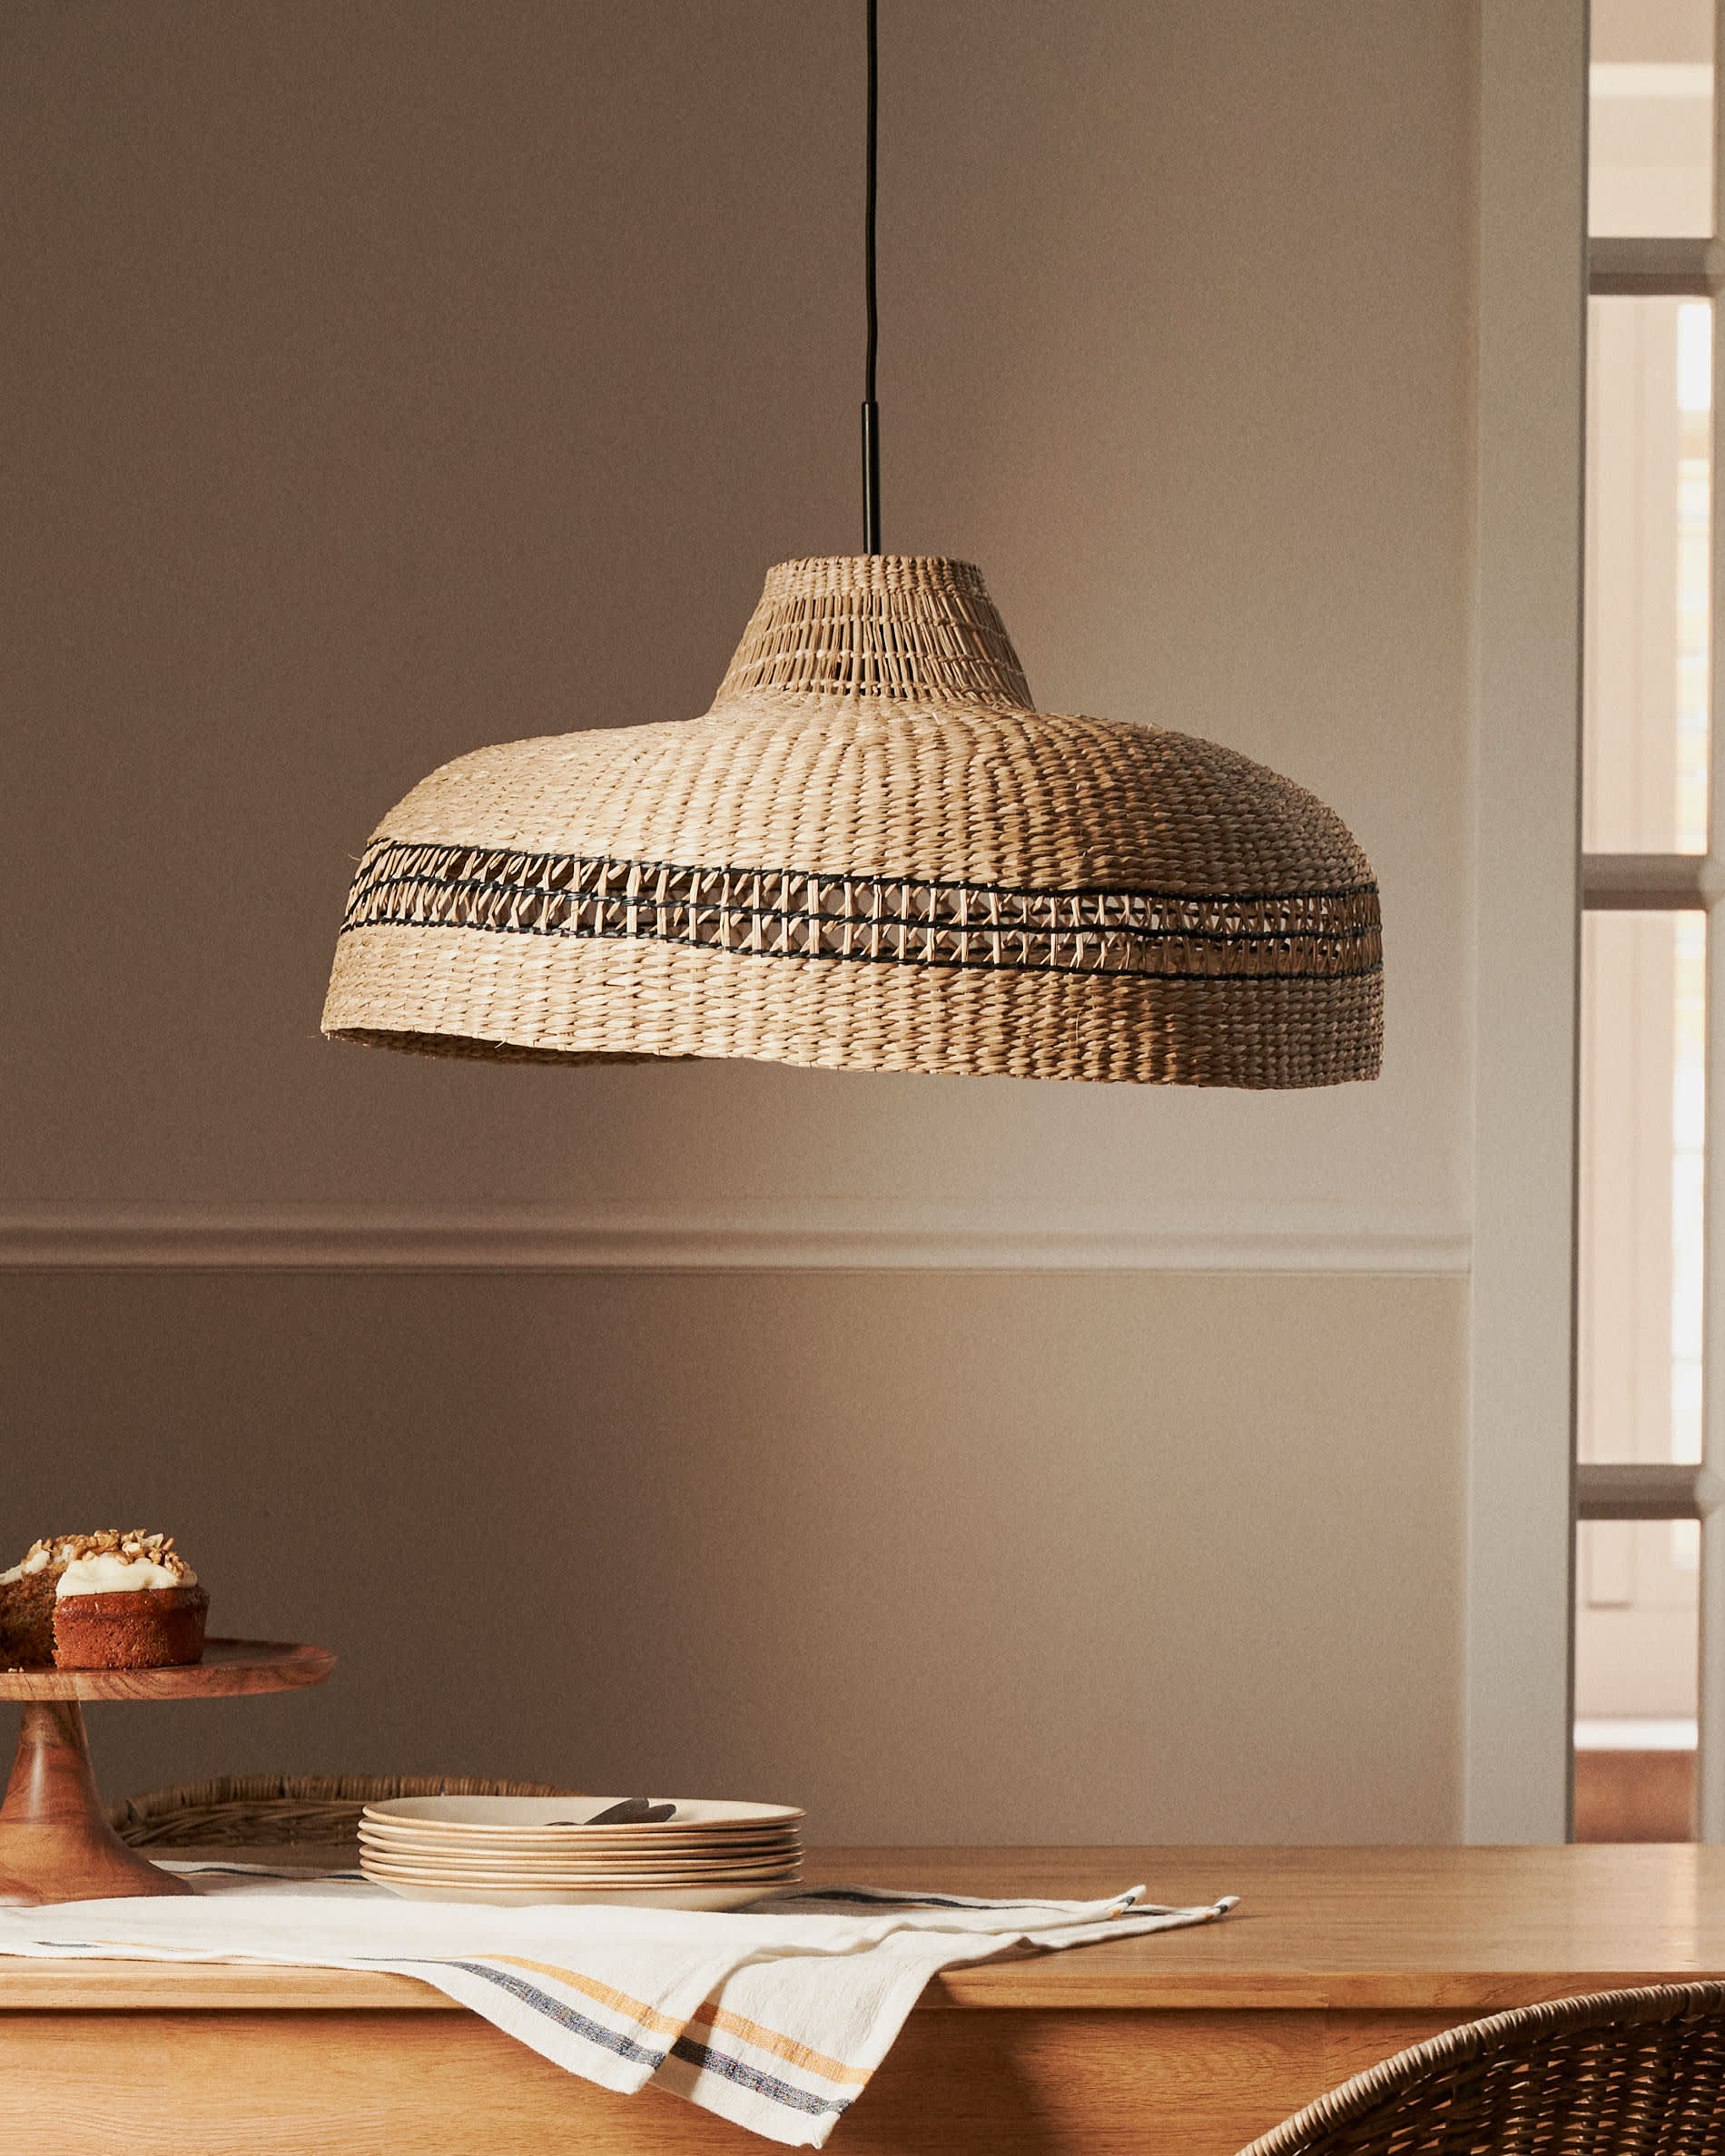 Rupia natural fiber ceiling lamp shade with a natural and black finish, Ø 55 cm